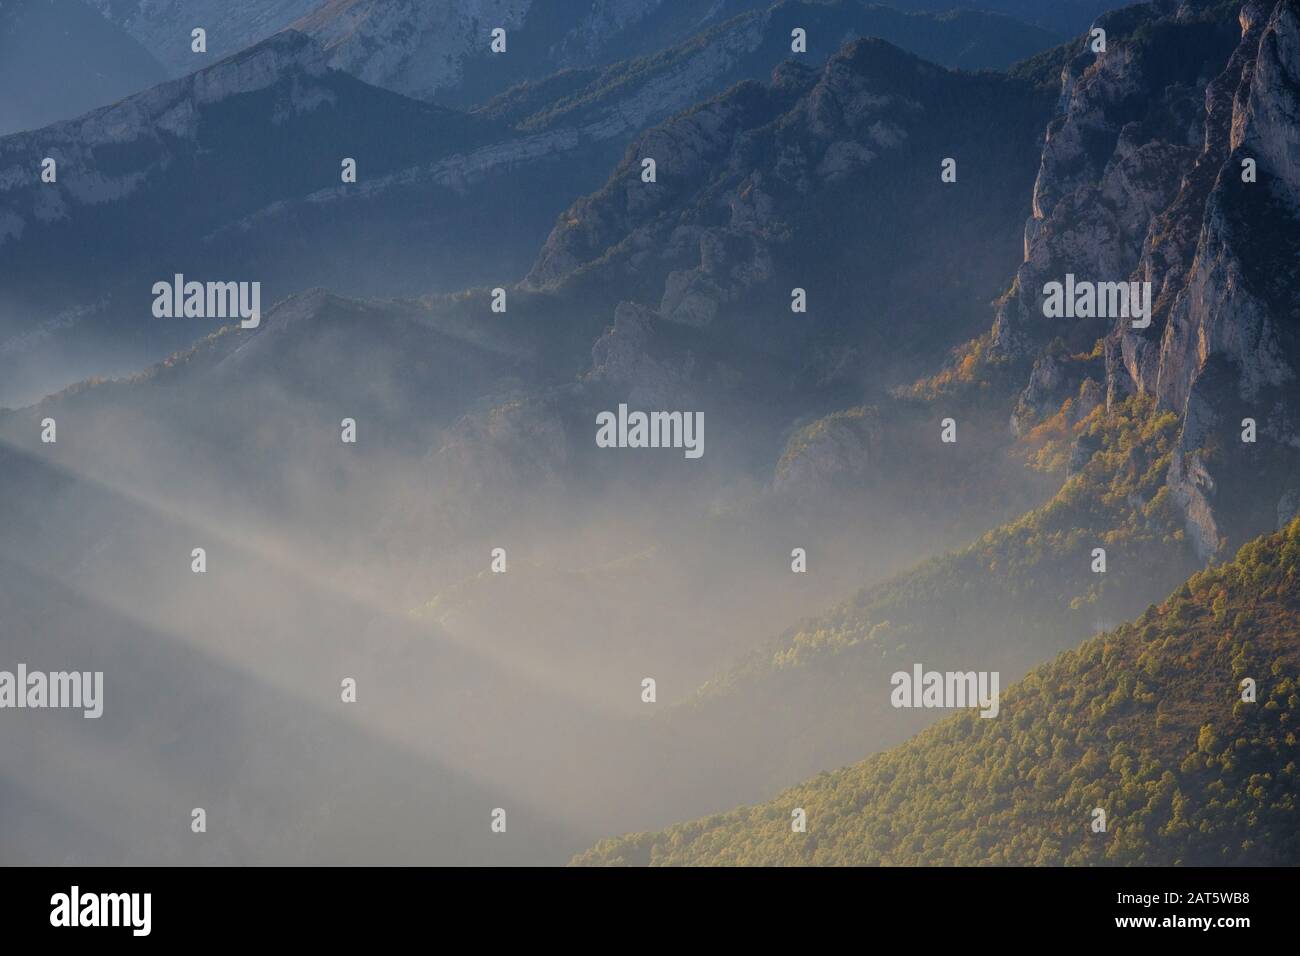 Low lying evening mist over forested mountains. Cadi-Moixero Natural Park. Catalonia. Spain. Stock Photo